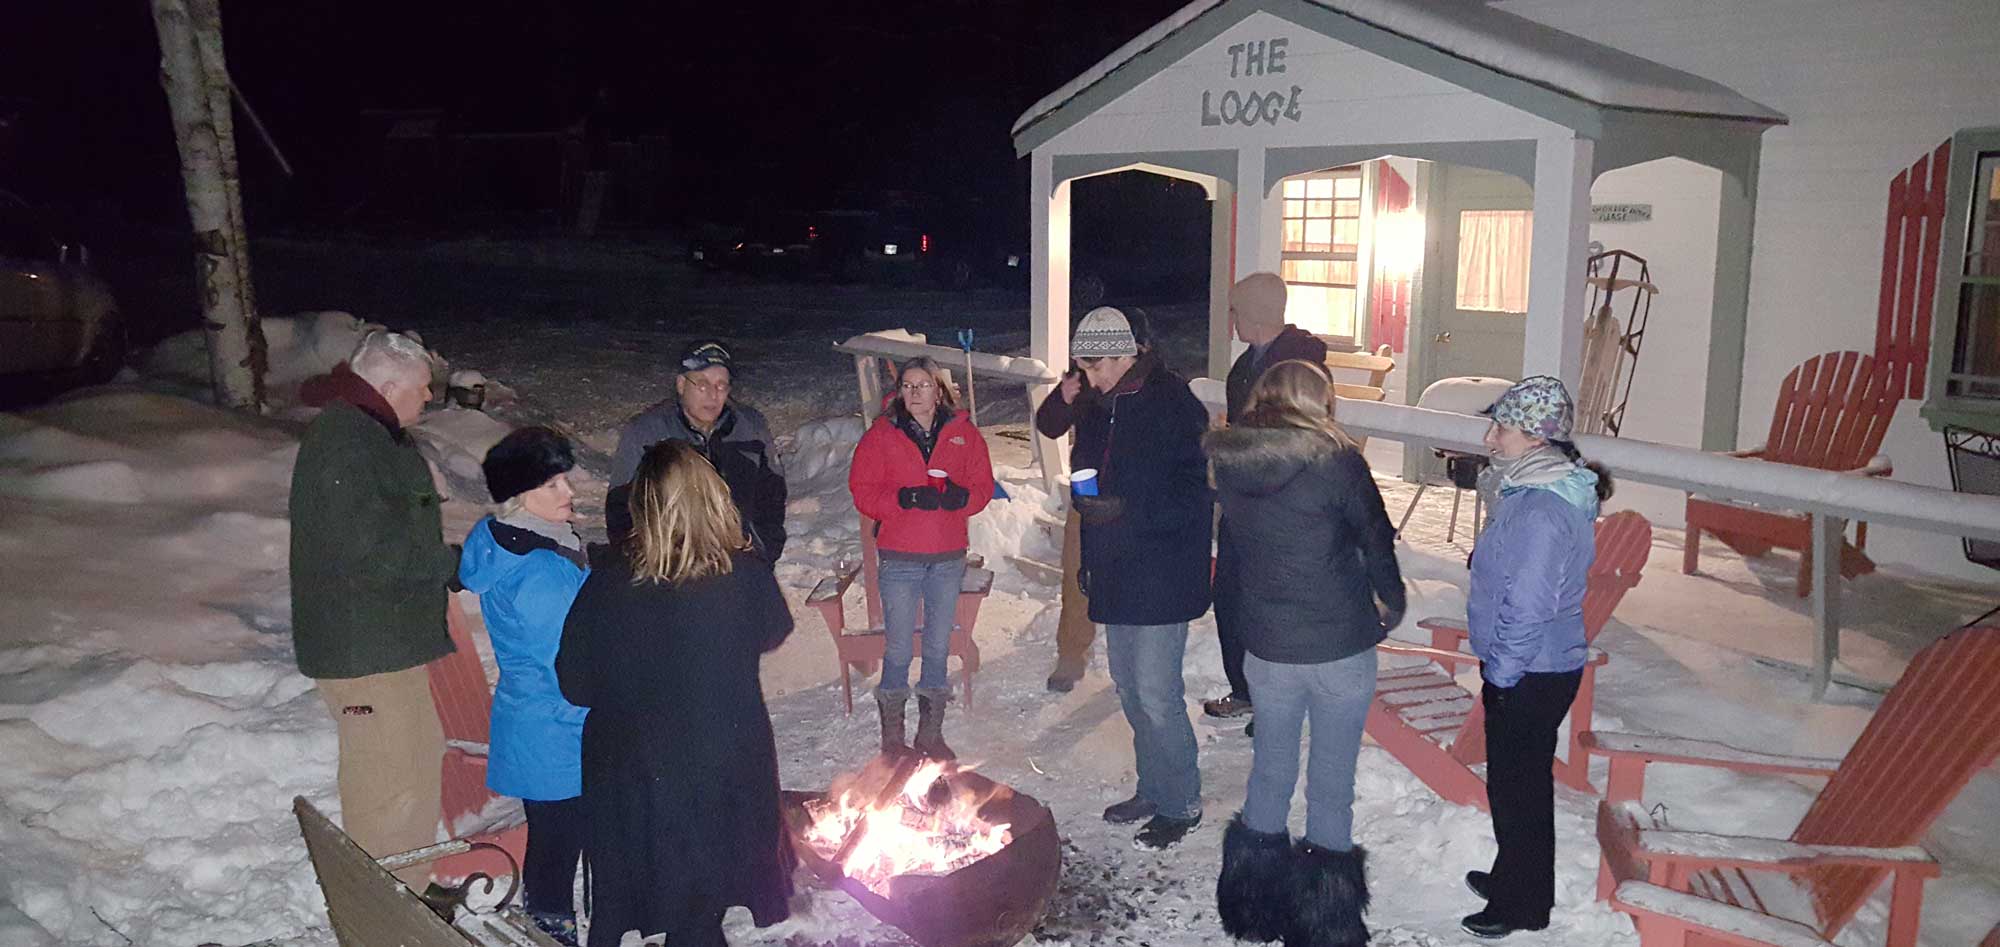 Winter-Celebration-around-a-campfire-at-the-Lodge